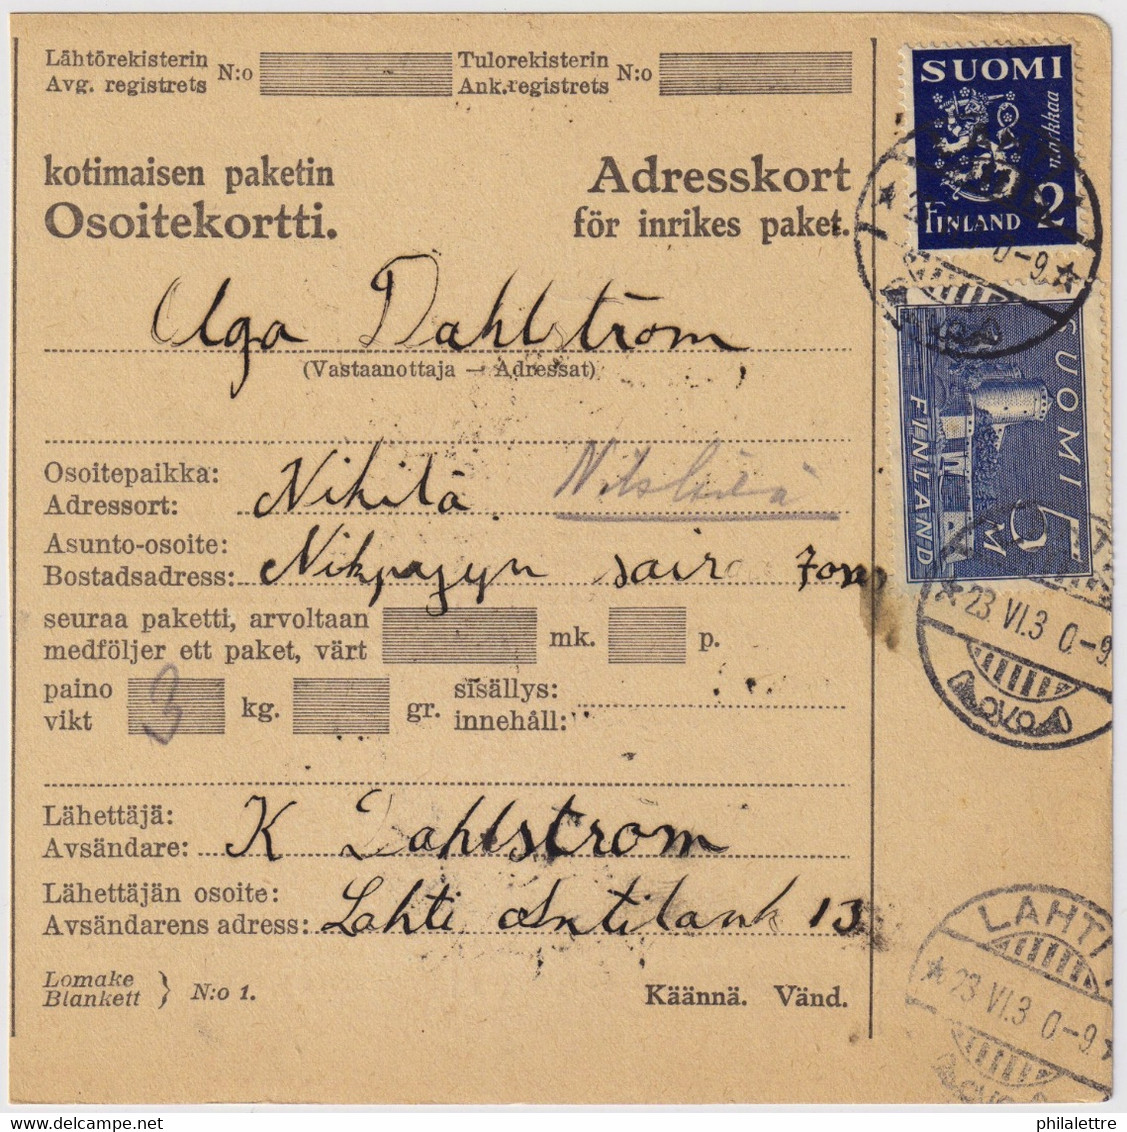 FINLANDE / SUOMI FINLAND 1930 LAHTI To NICKBY - Osoitekortti / Packet Post Address Card - Covers & Documents